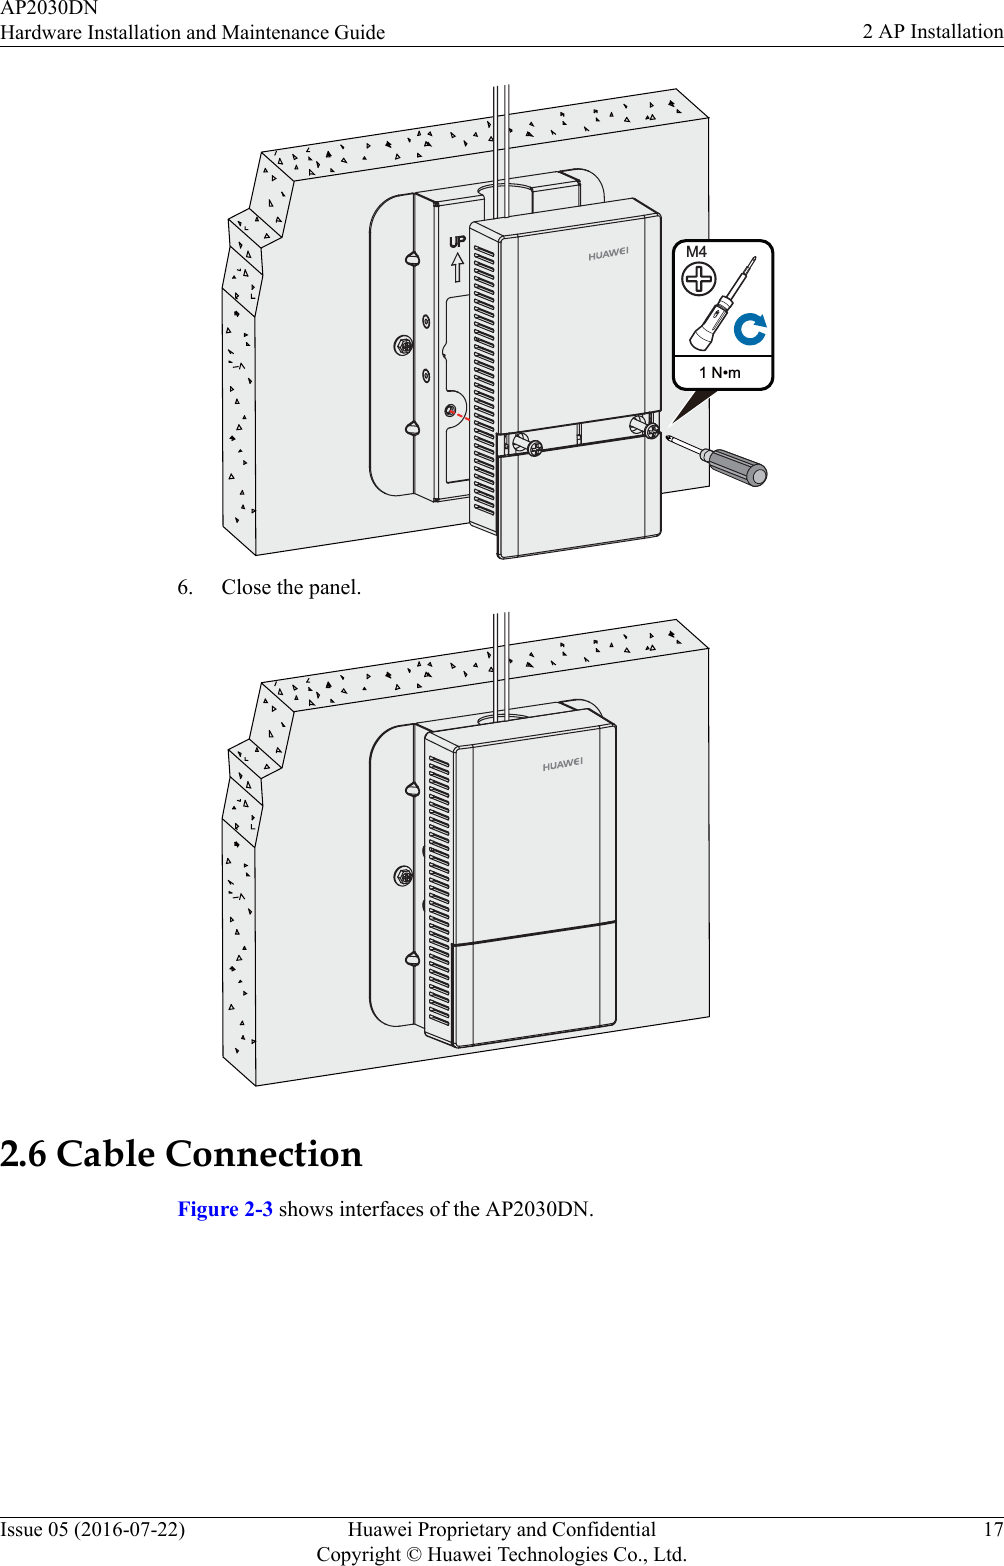 1 N•mM46. Close the panel.2.6 Cable ConnectionFigure 2-3 shows interfaces of the AP2030DN.AP2030DNHardware Installation and Maintenance Guide 2 AP InstallationIssue 05 (2016-07-22) Huawei Proprietary and ConfidentialCopyright © Huawei Technologies Co., Ltd.17